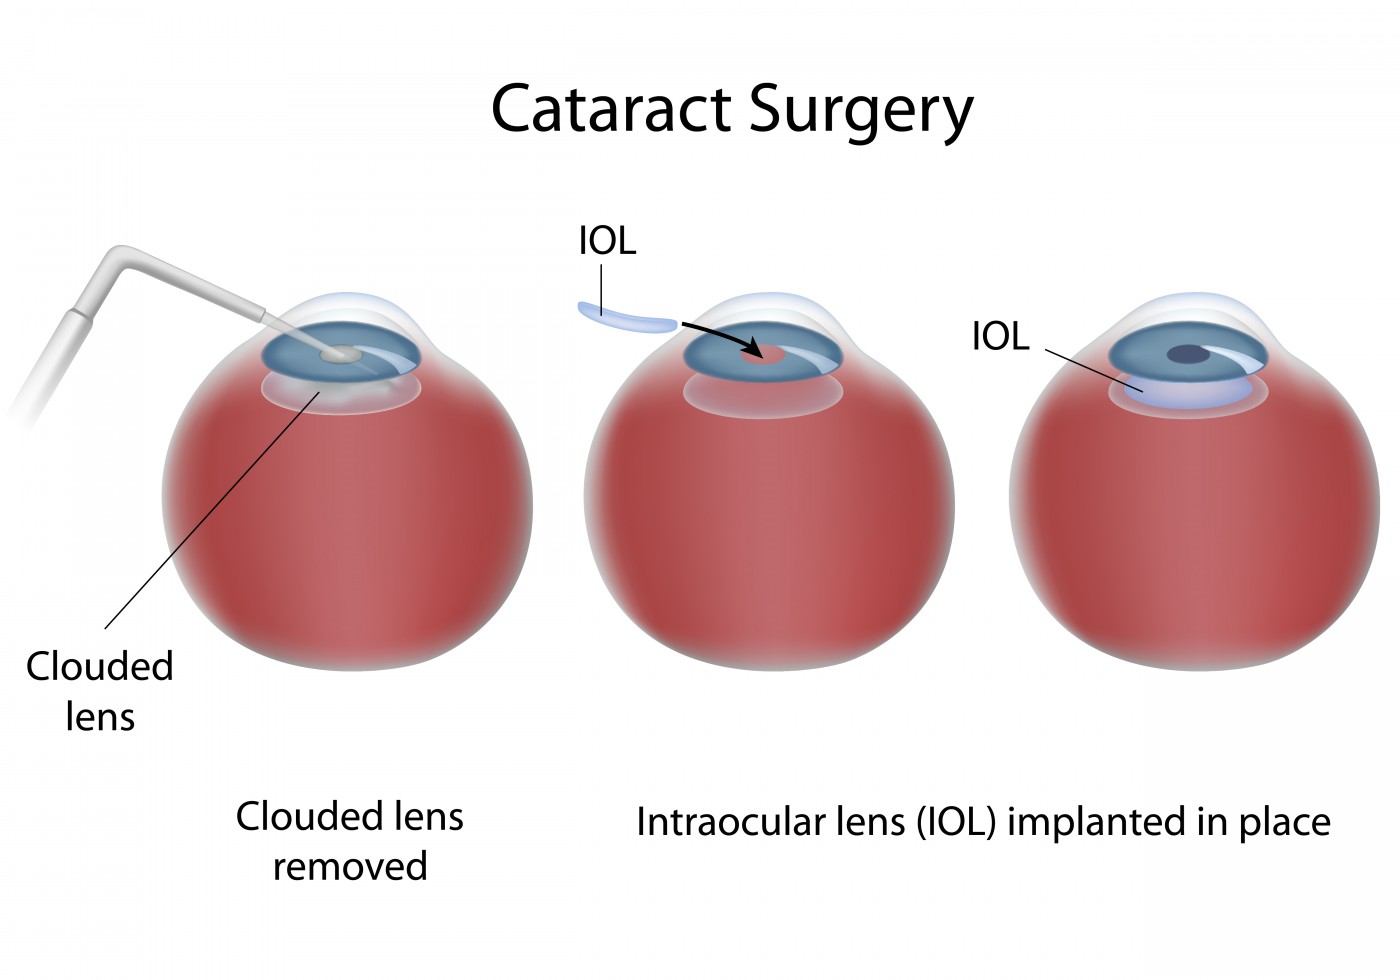 Researchers to Study Effect of Cataract Surgery on Circadian Rhythm Disorders